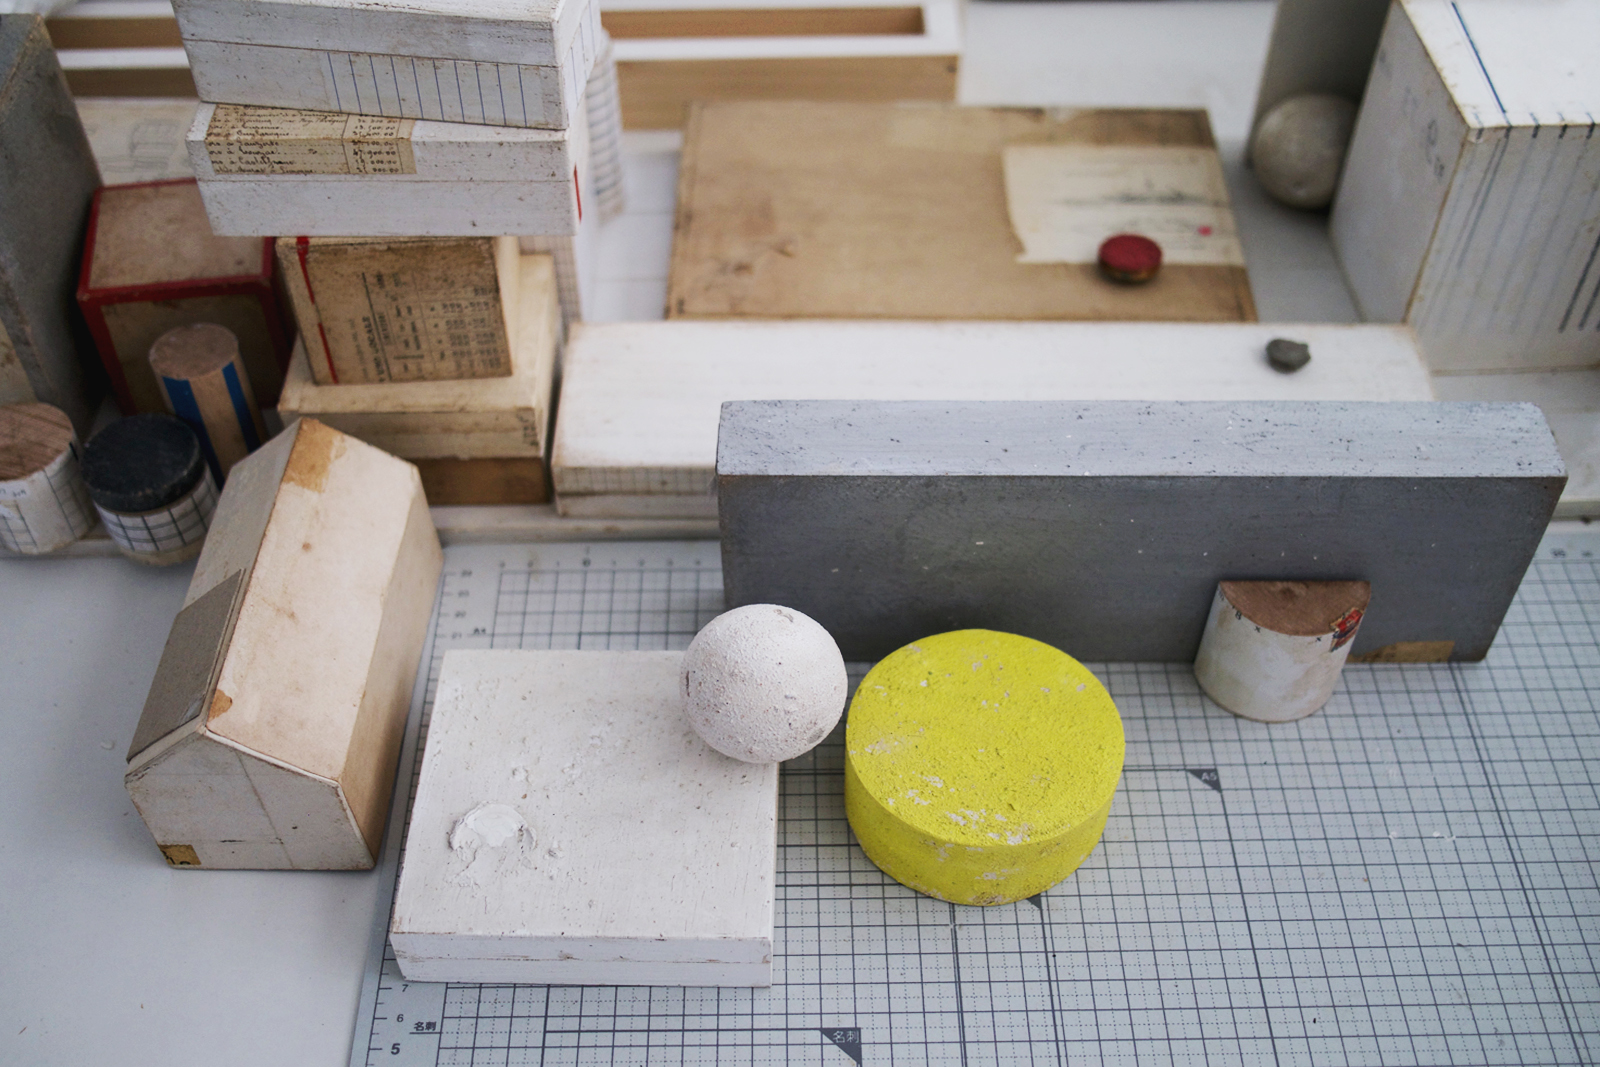 Works in progress with yellow cylinder, house and sphere